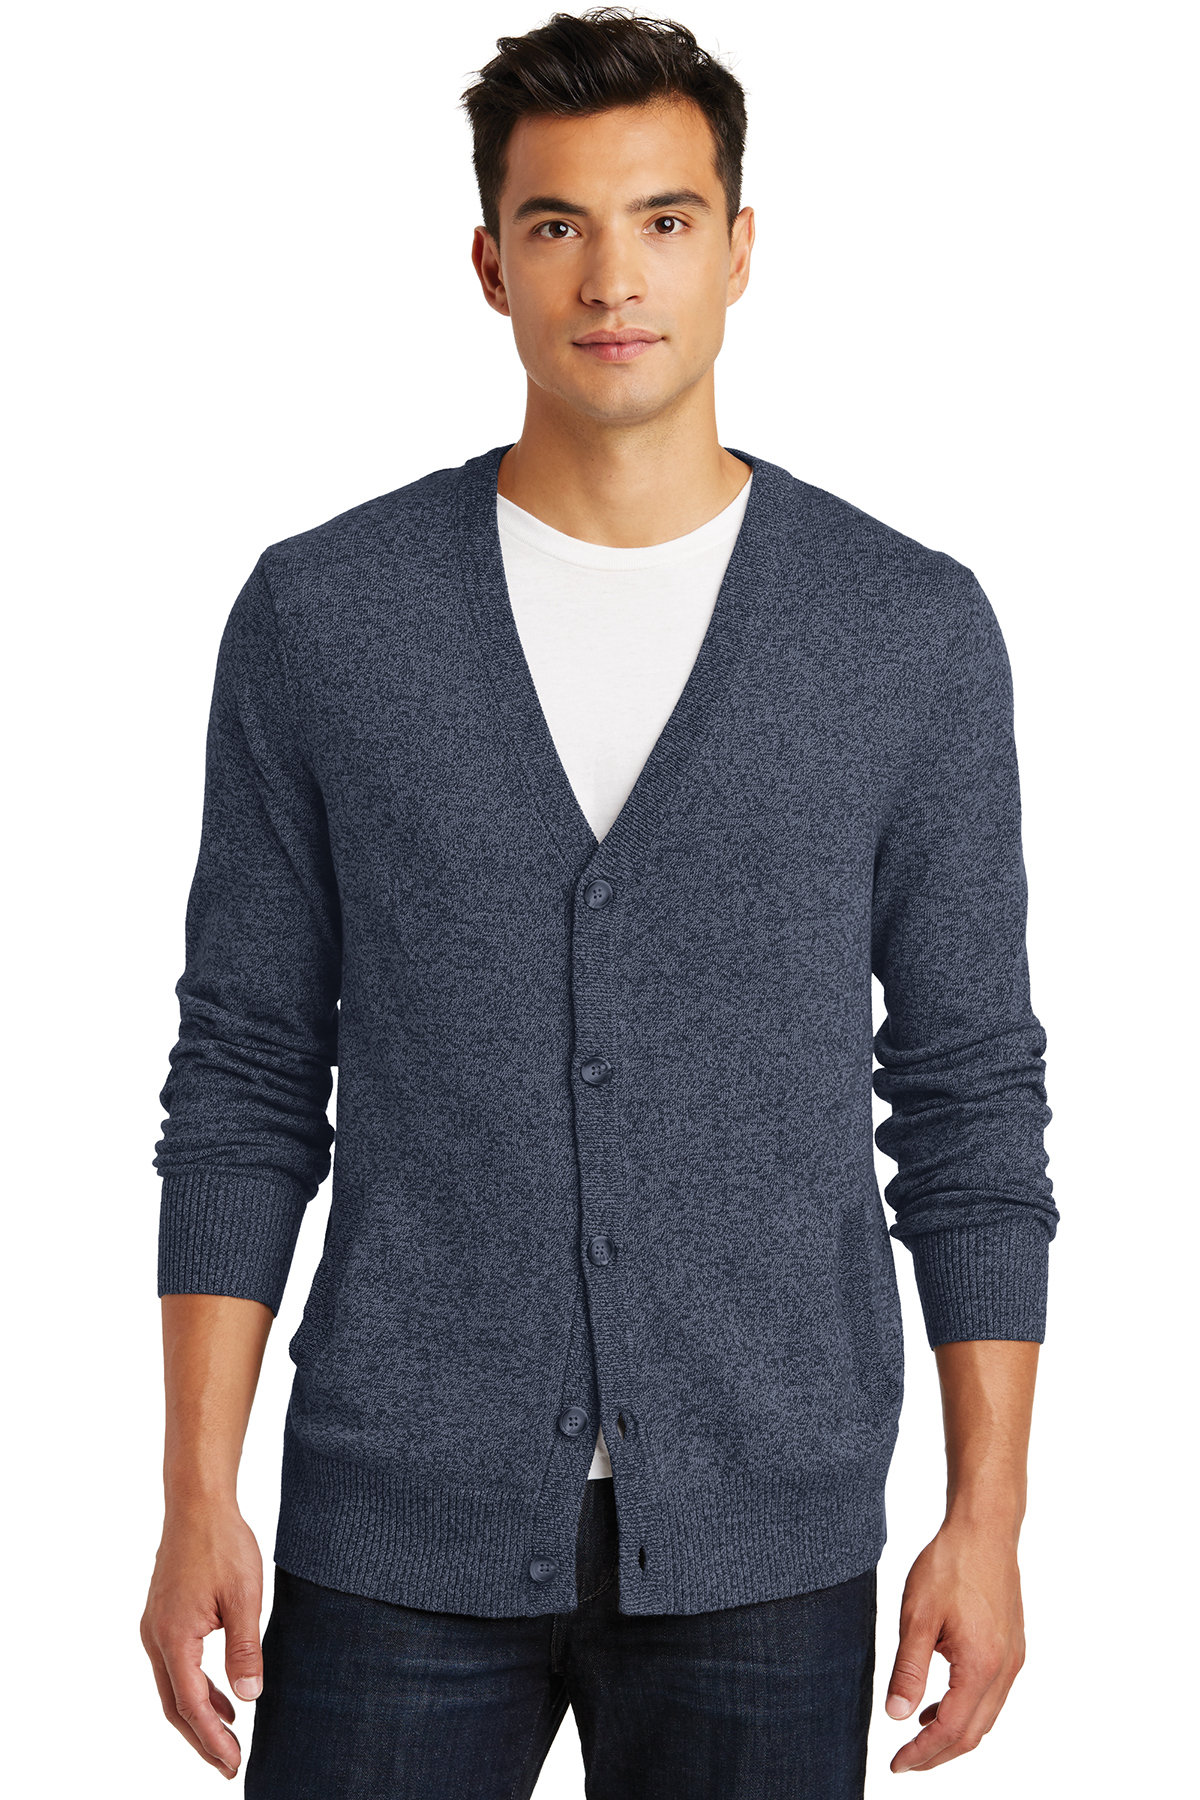 District Made® - Mens Cardigan Sweater | Sweaters | Polos/Knits | SanMar